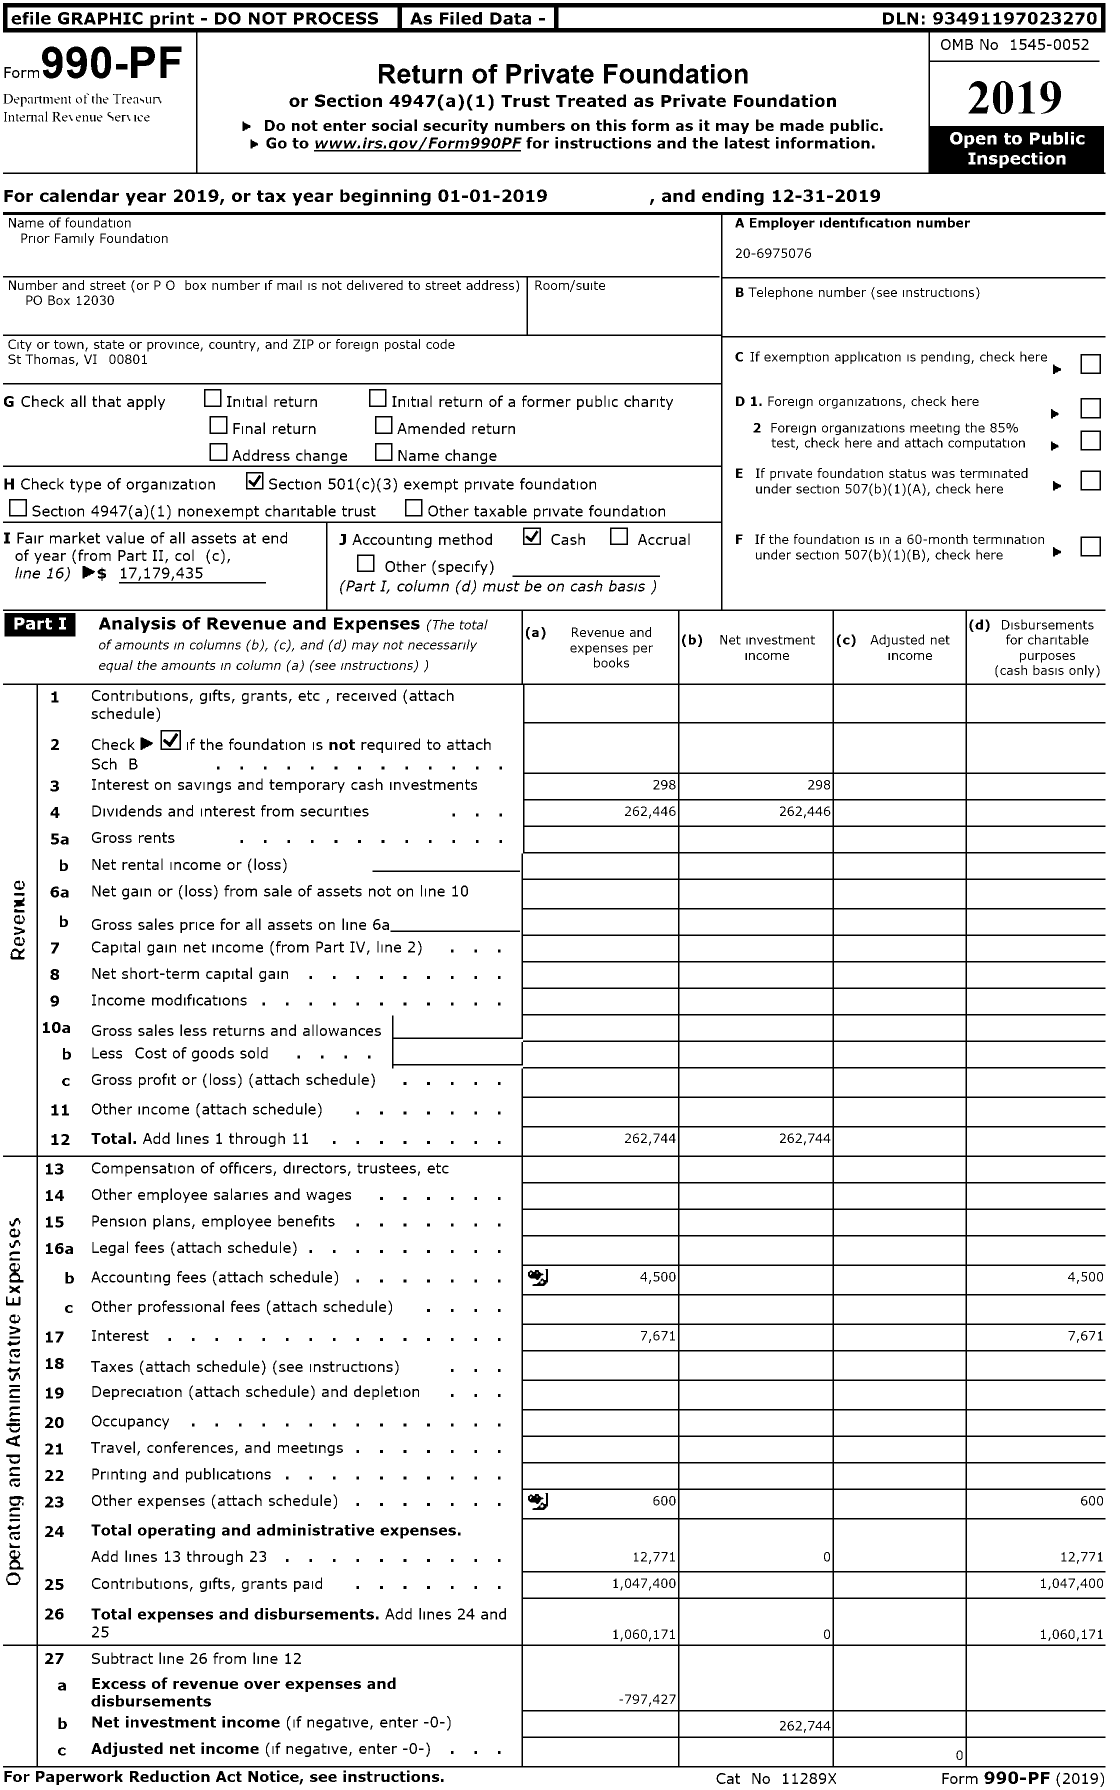 Image of first page of 2019 Form 990PR for Prior Family Foundation